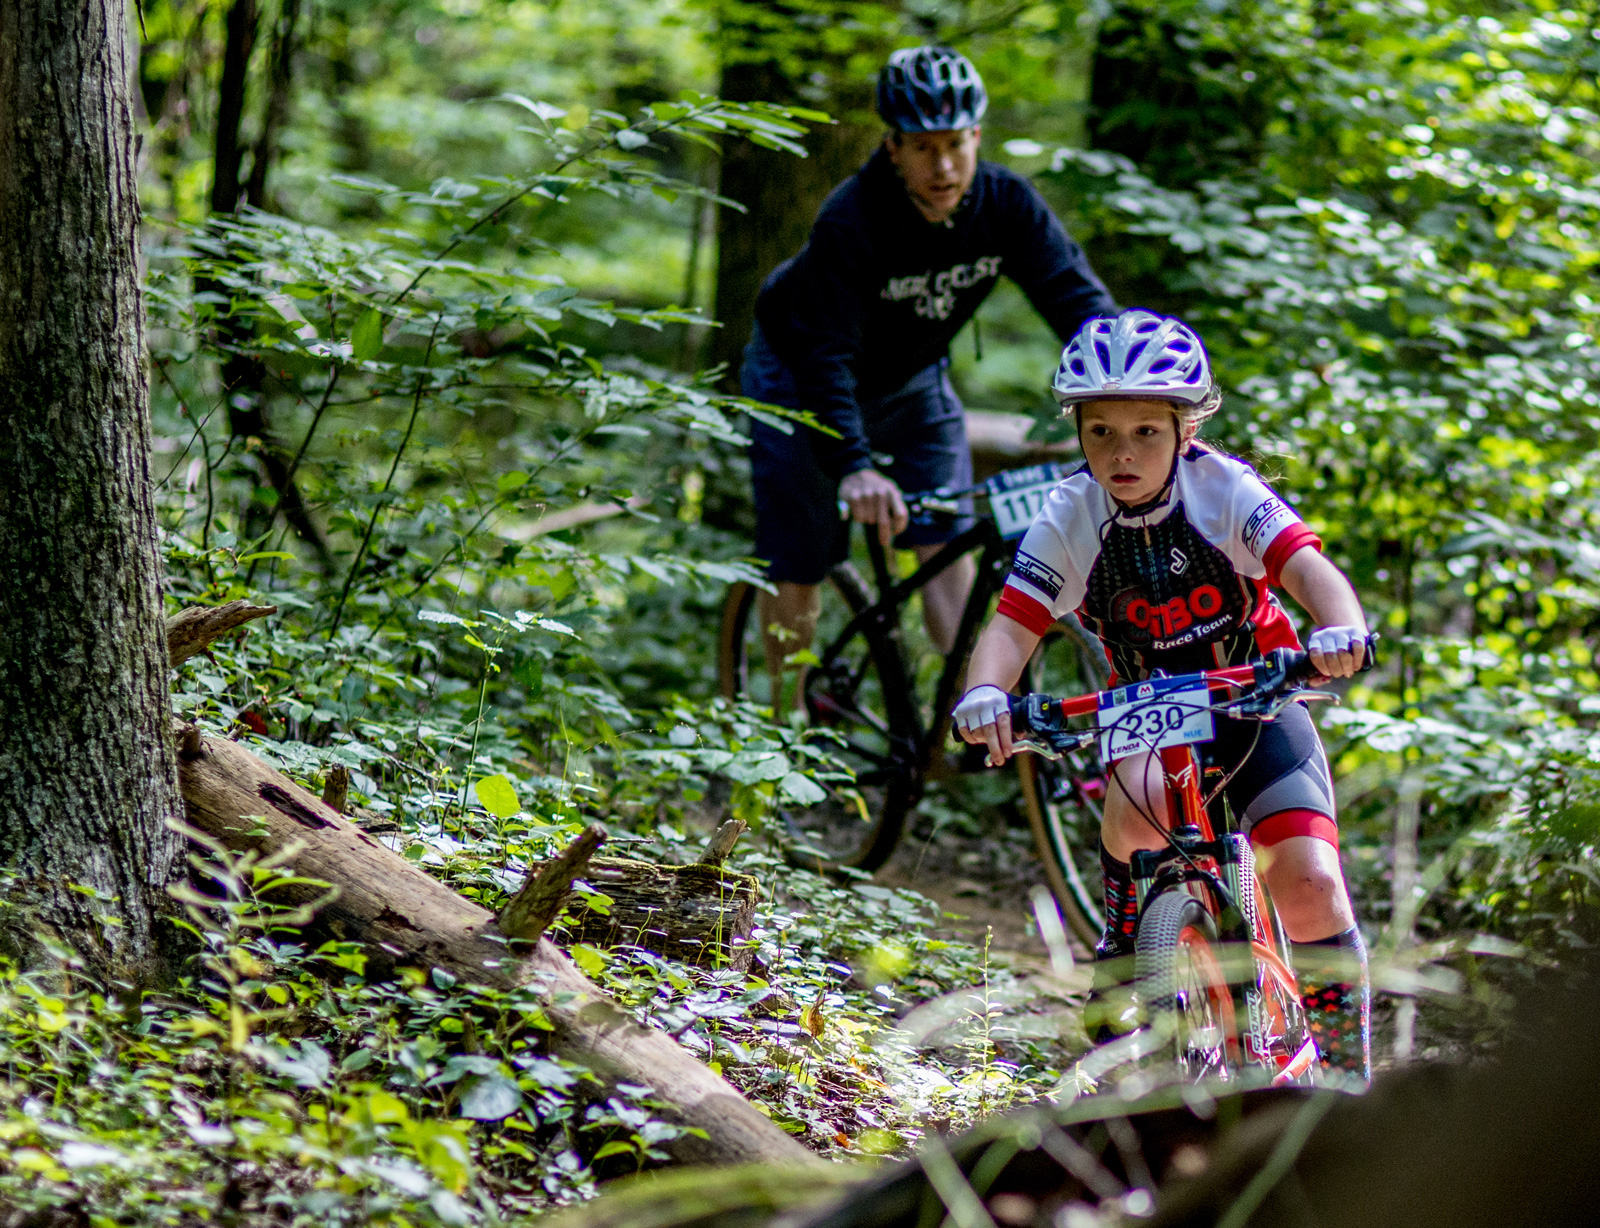 Competitors on the Mountain Bike Trail at Chestnut Ridge during a COMBO event